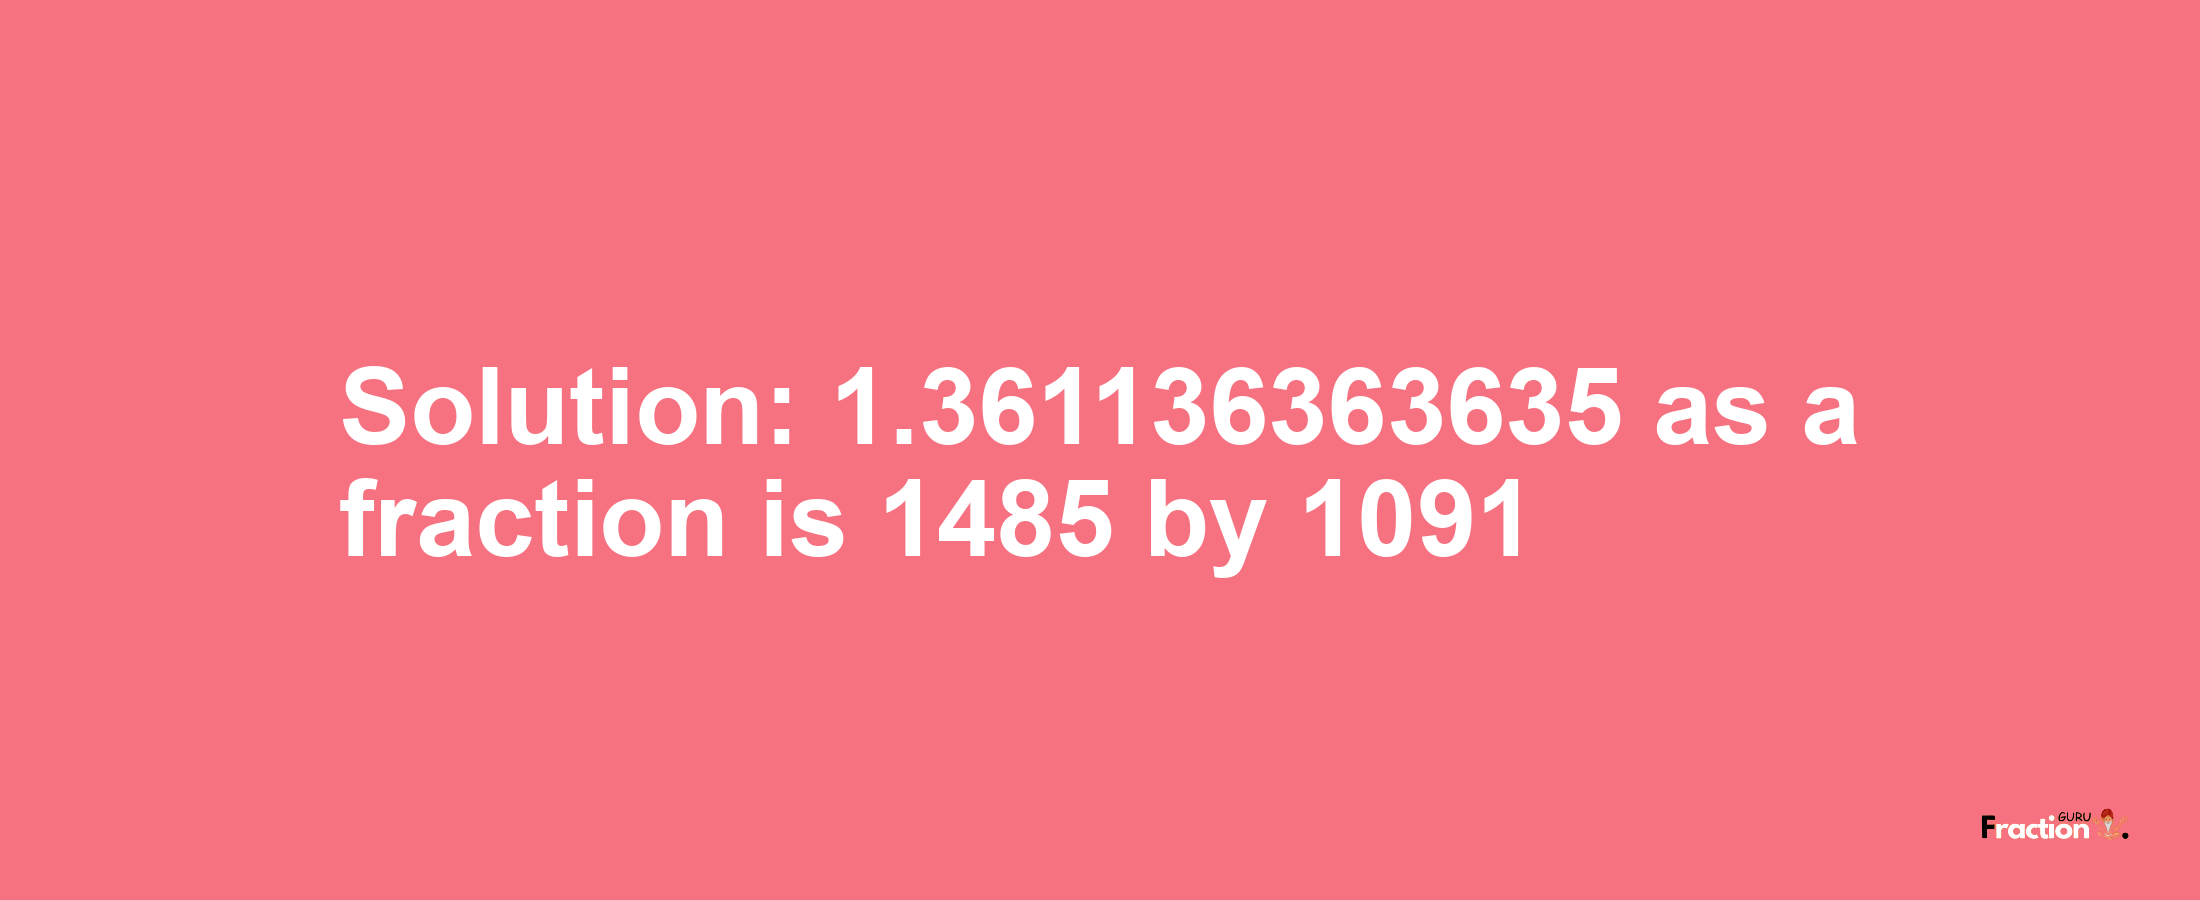 Solution:1.361136363635 as a fraction is 1485/1091